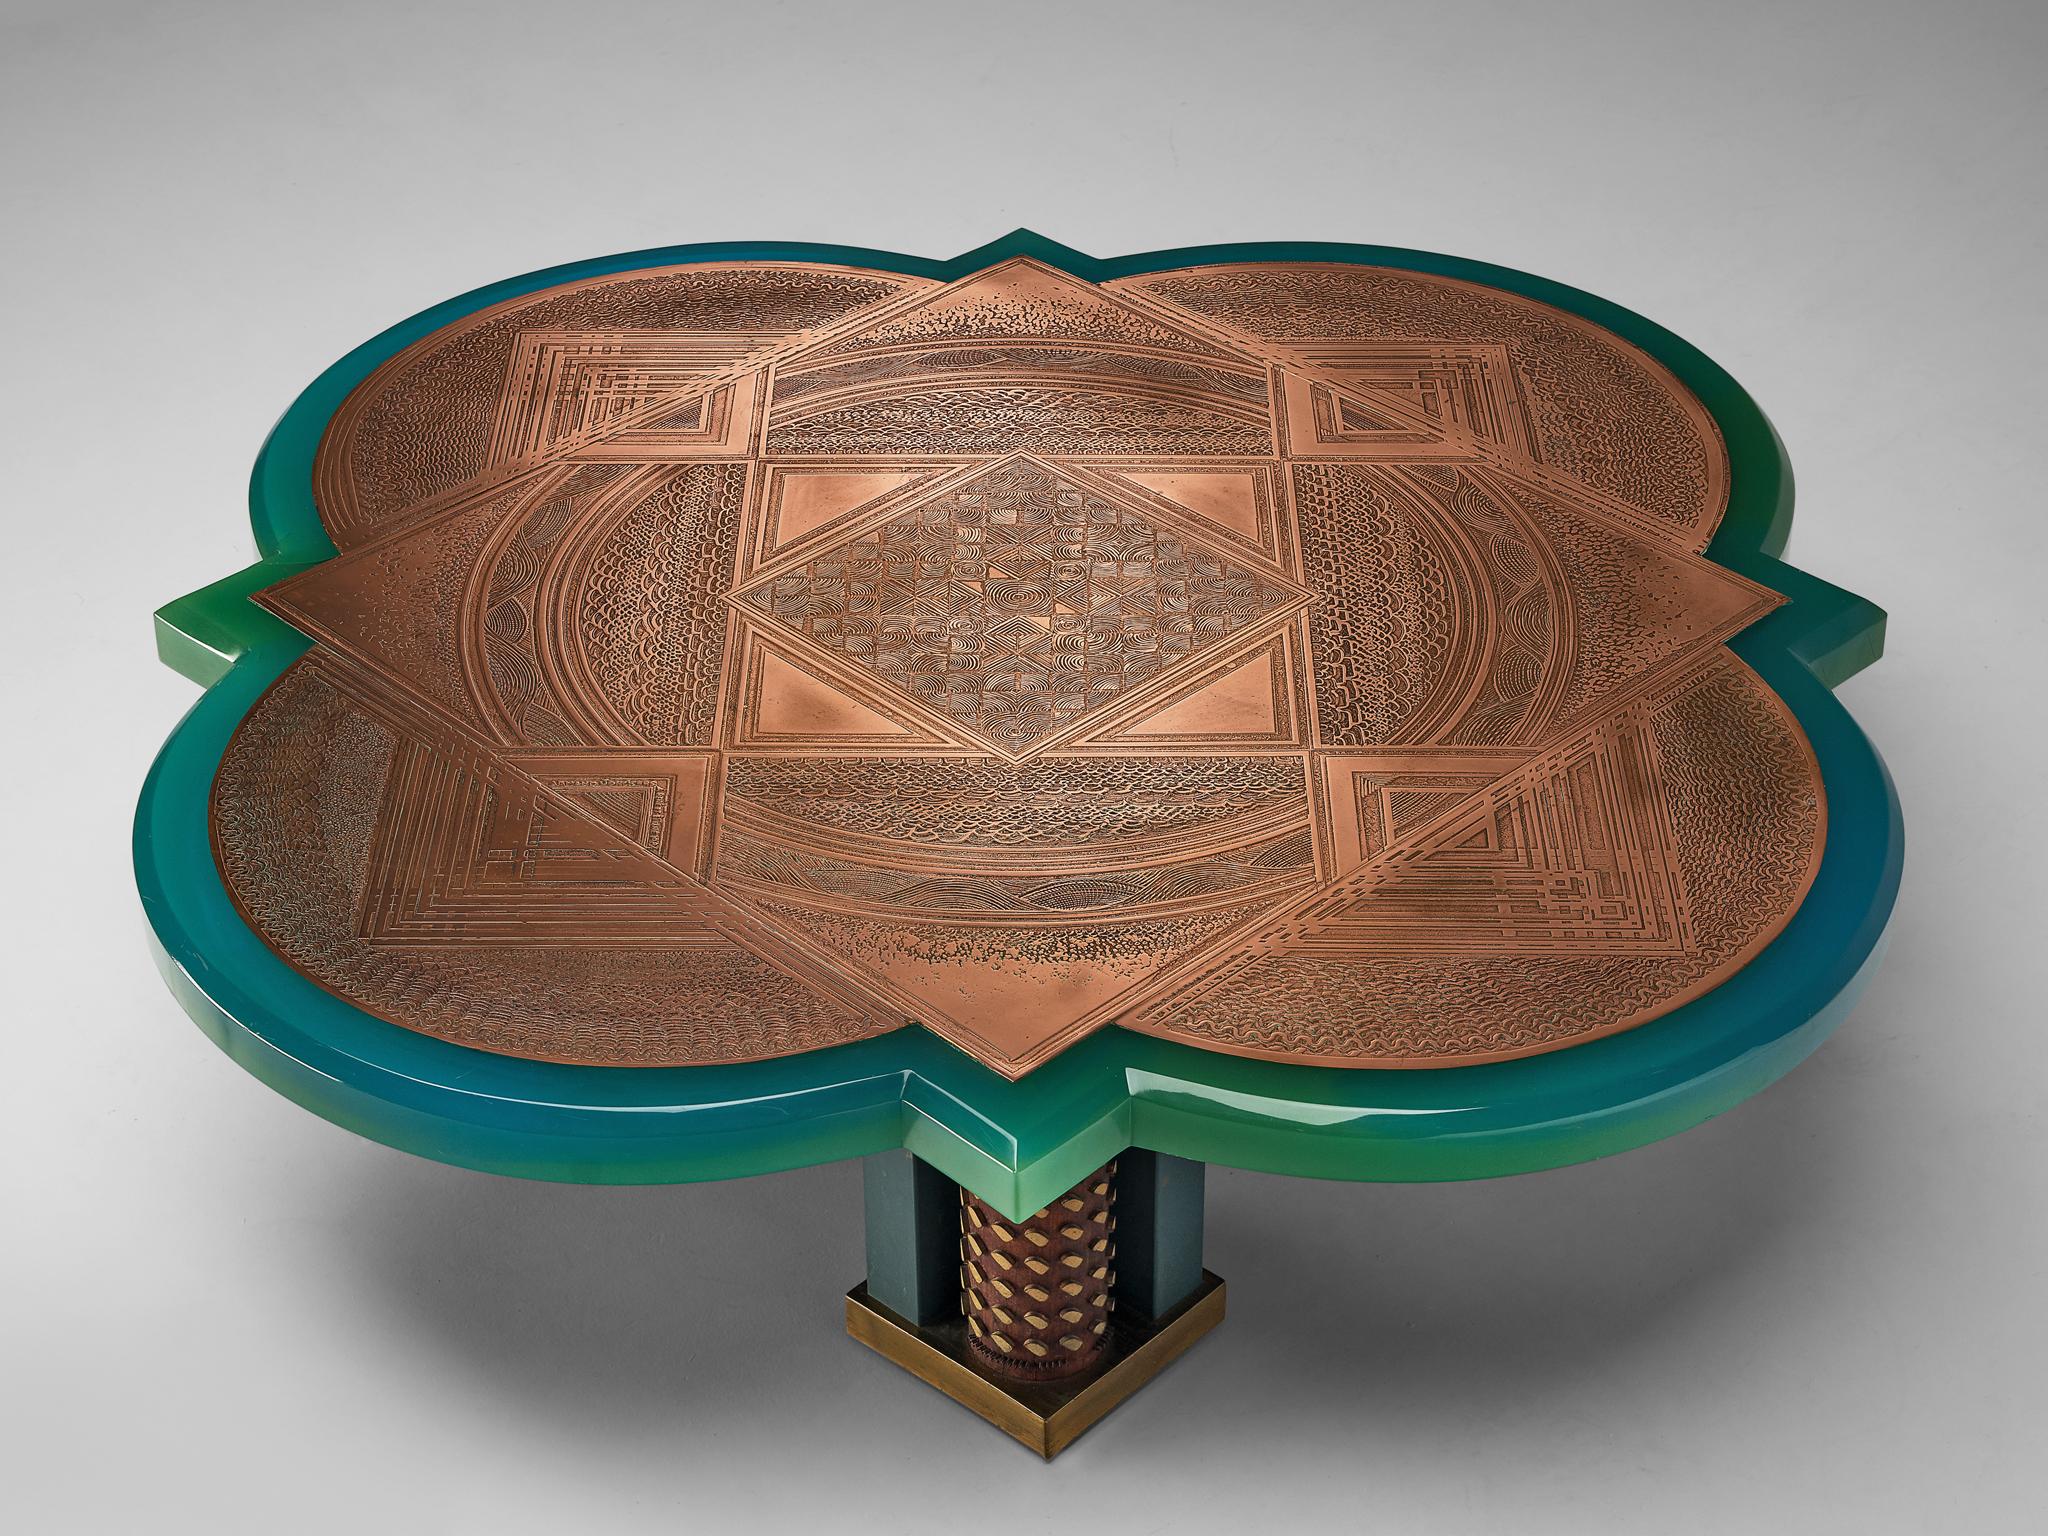 Metal Unique Armand Jonckers Coffee Table in Green Resin and Copper  For Sale